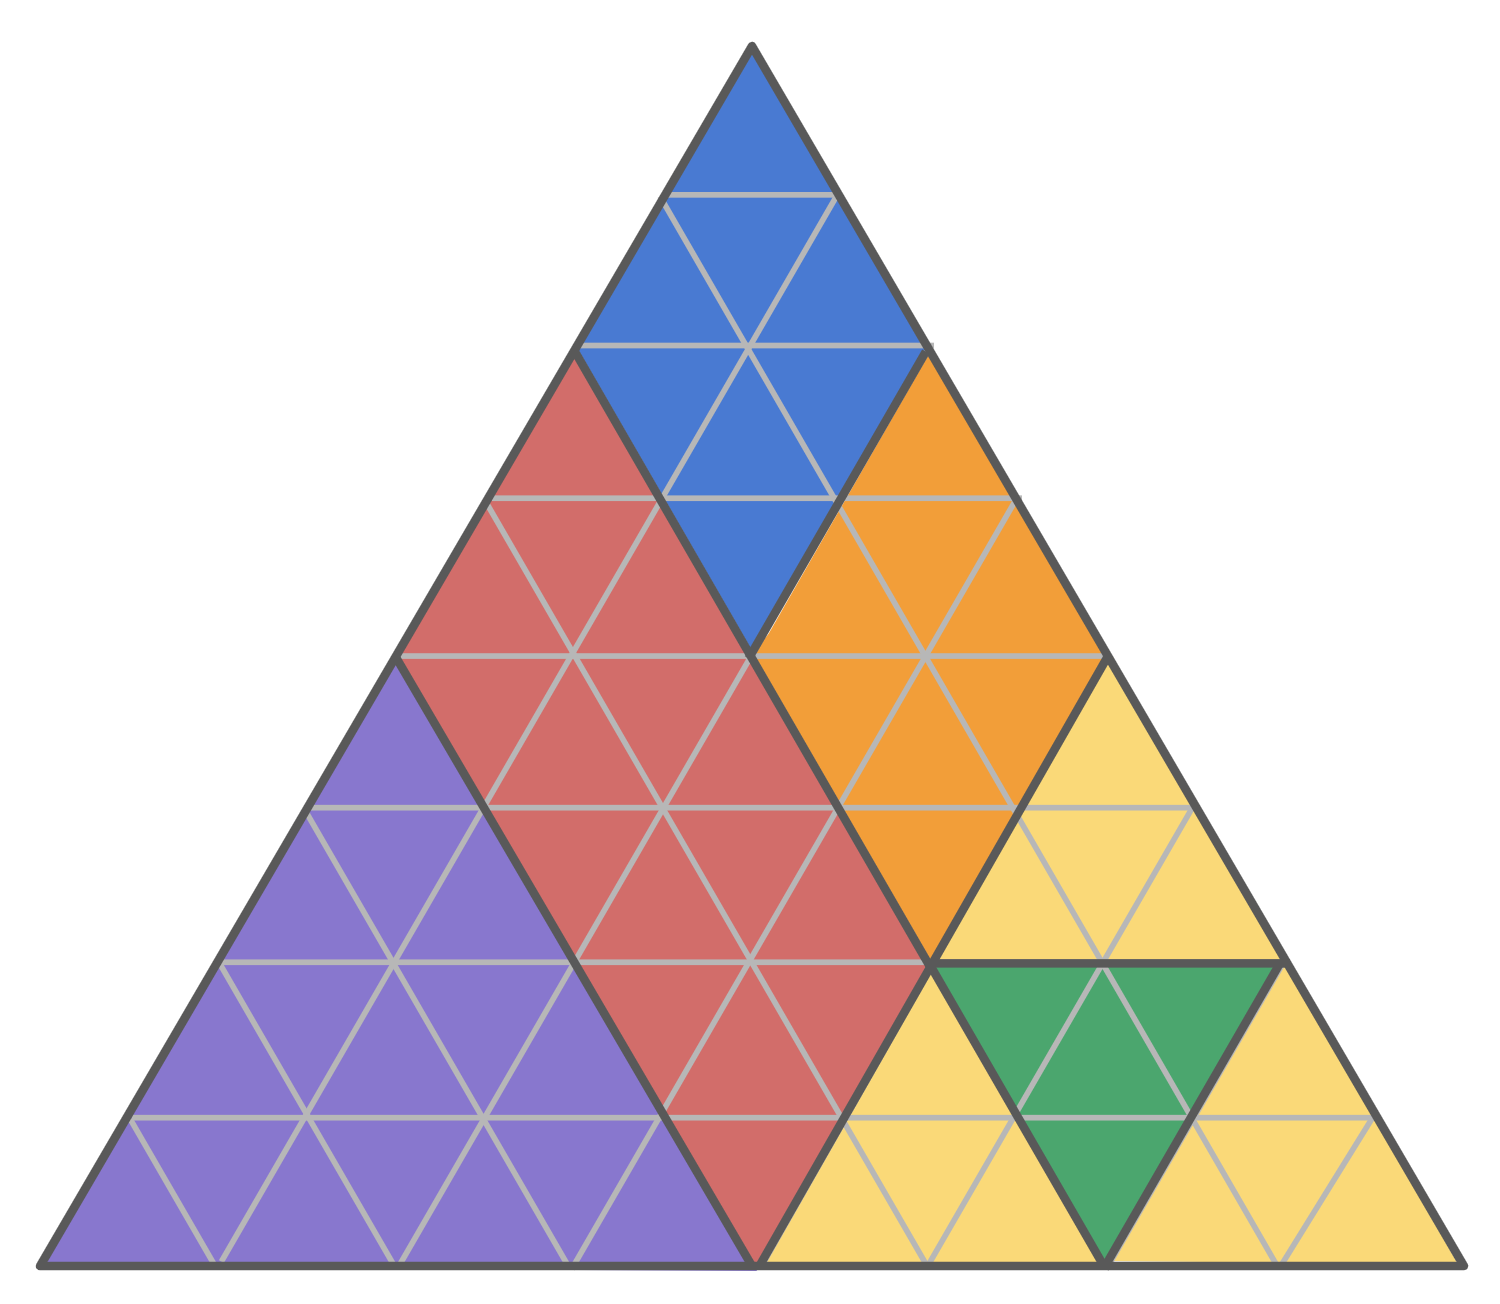 A triangle grid within a large triangular outline (a total of 64 triangles contained within.) The shape is also divided into different coloured fractional parts in a variety of sizes: A large purple triangle and a red parallelogram that are 16 triangular units each, a blue and orange rhombus that are 8 triangular units each, and 3 smaller yellow triangles and one smaller green triangle that are 4 triangular units each.